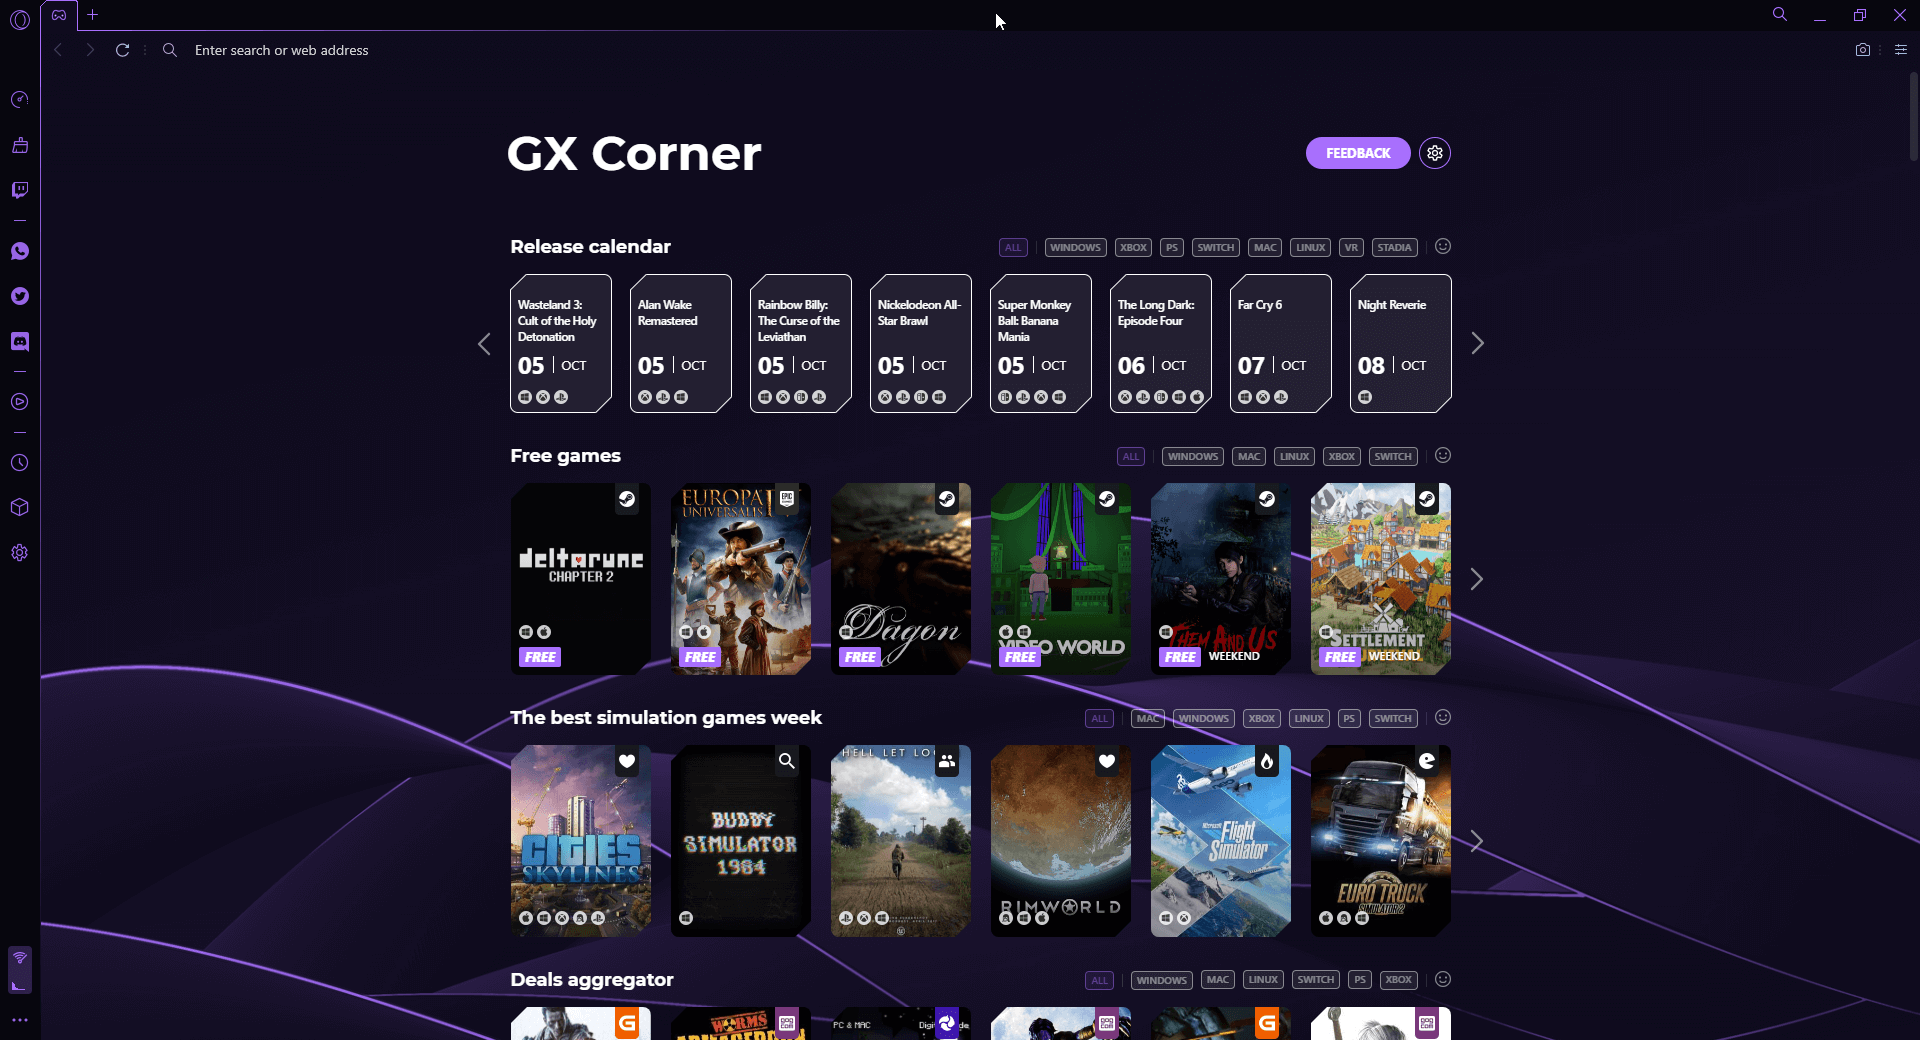 Opera GX, the Browser for Gamers, Surpasses 25 Million Monthly Active Users